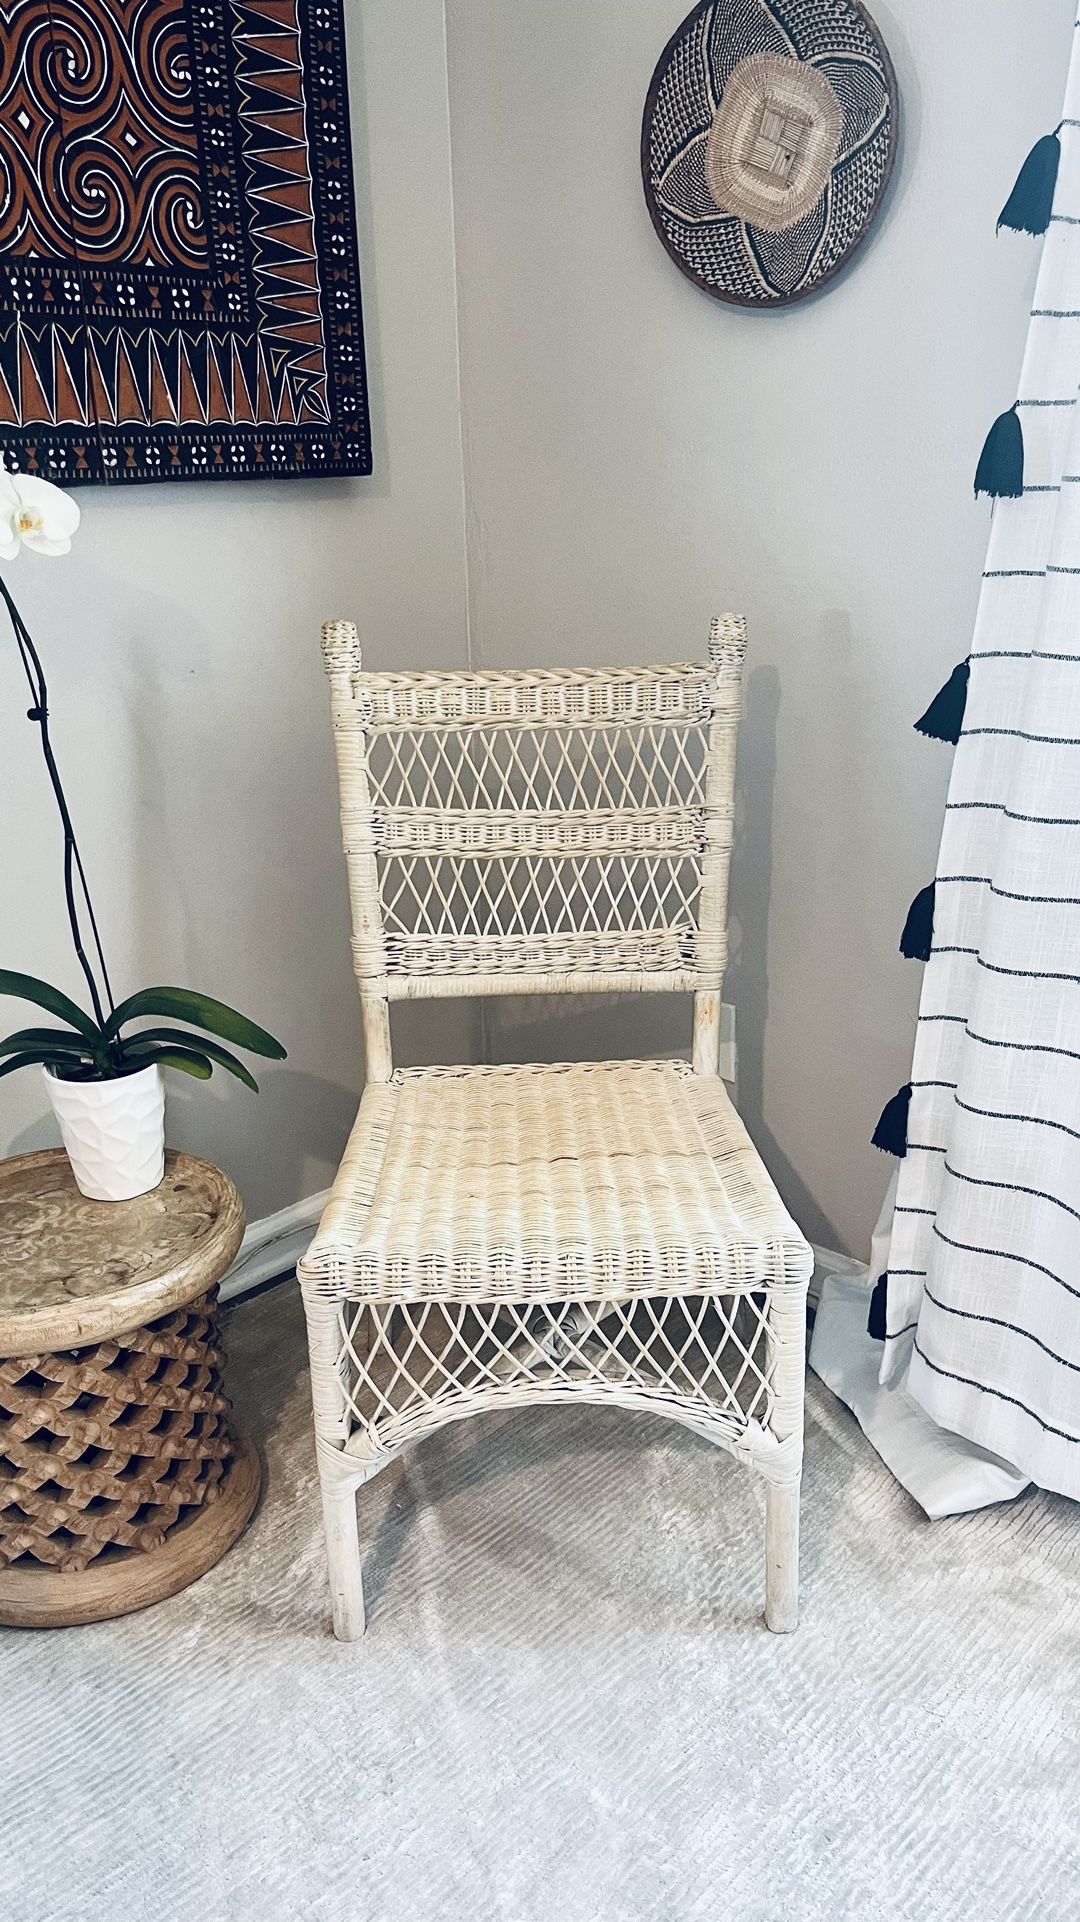 Gorgeous Vintage Original White Washed Wicker Rattan Chair with Open Crosshatch and Braid Details